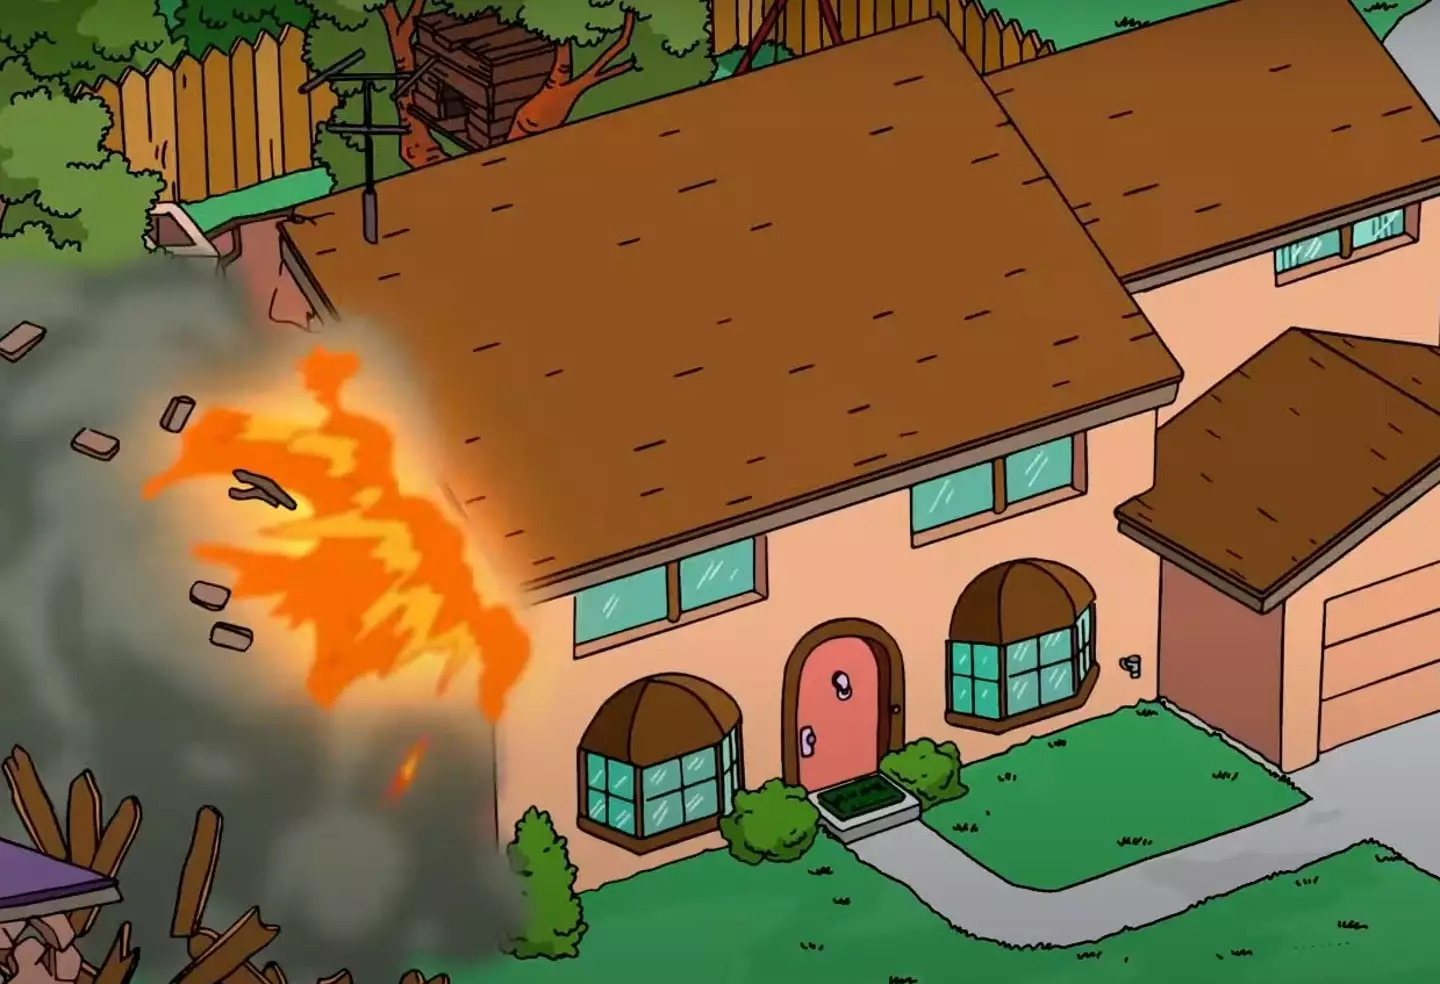 The beloved 742 Evergreen Terrace residence exploded in a cloud of fire and smoke in the latest trailer for the 35th season.